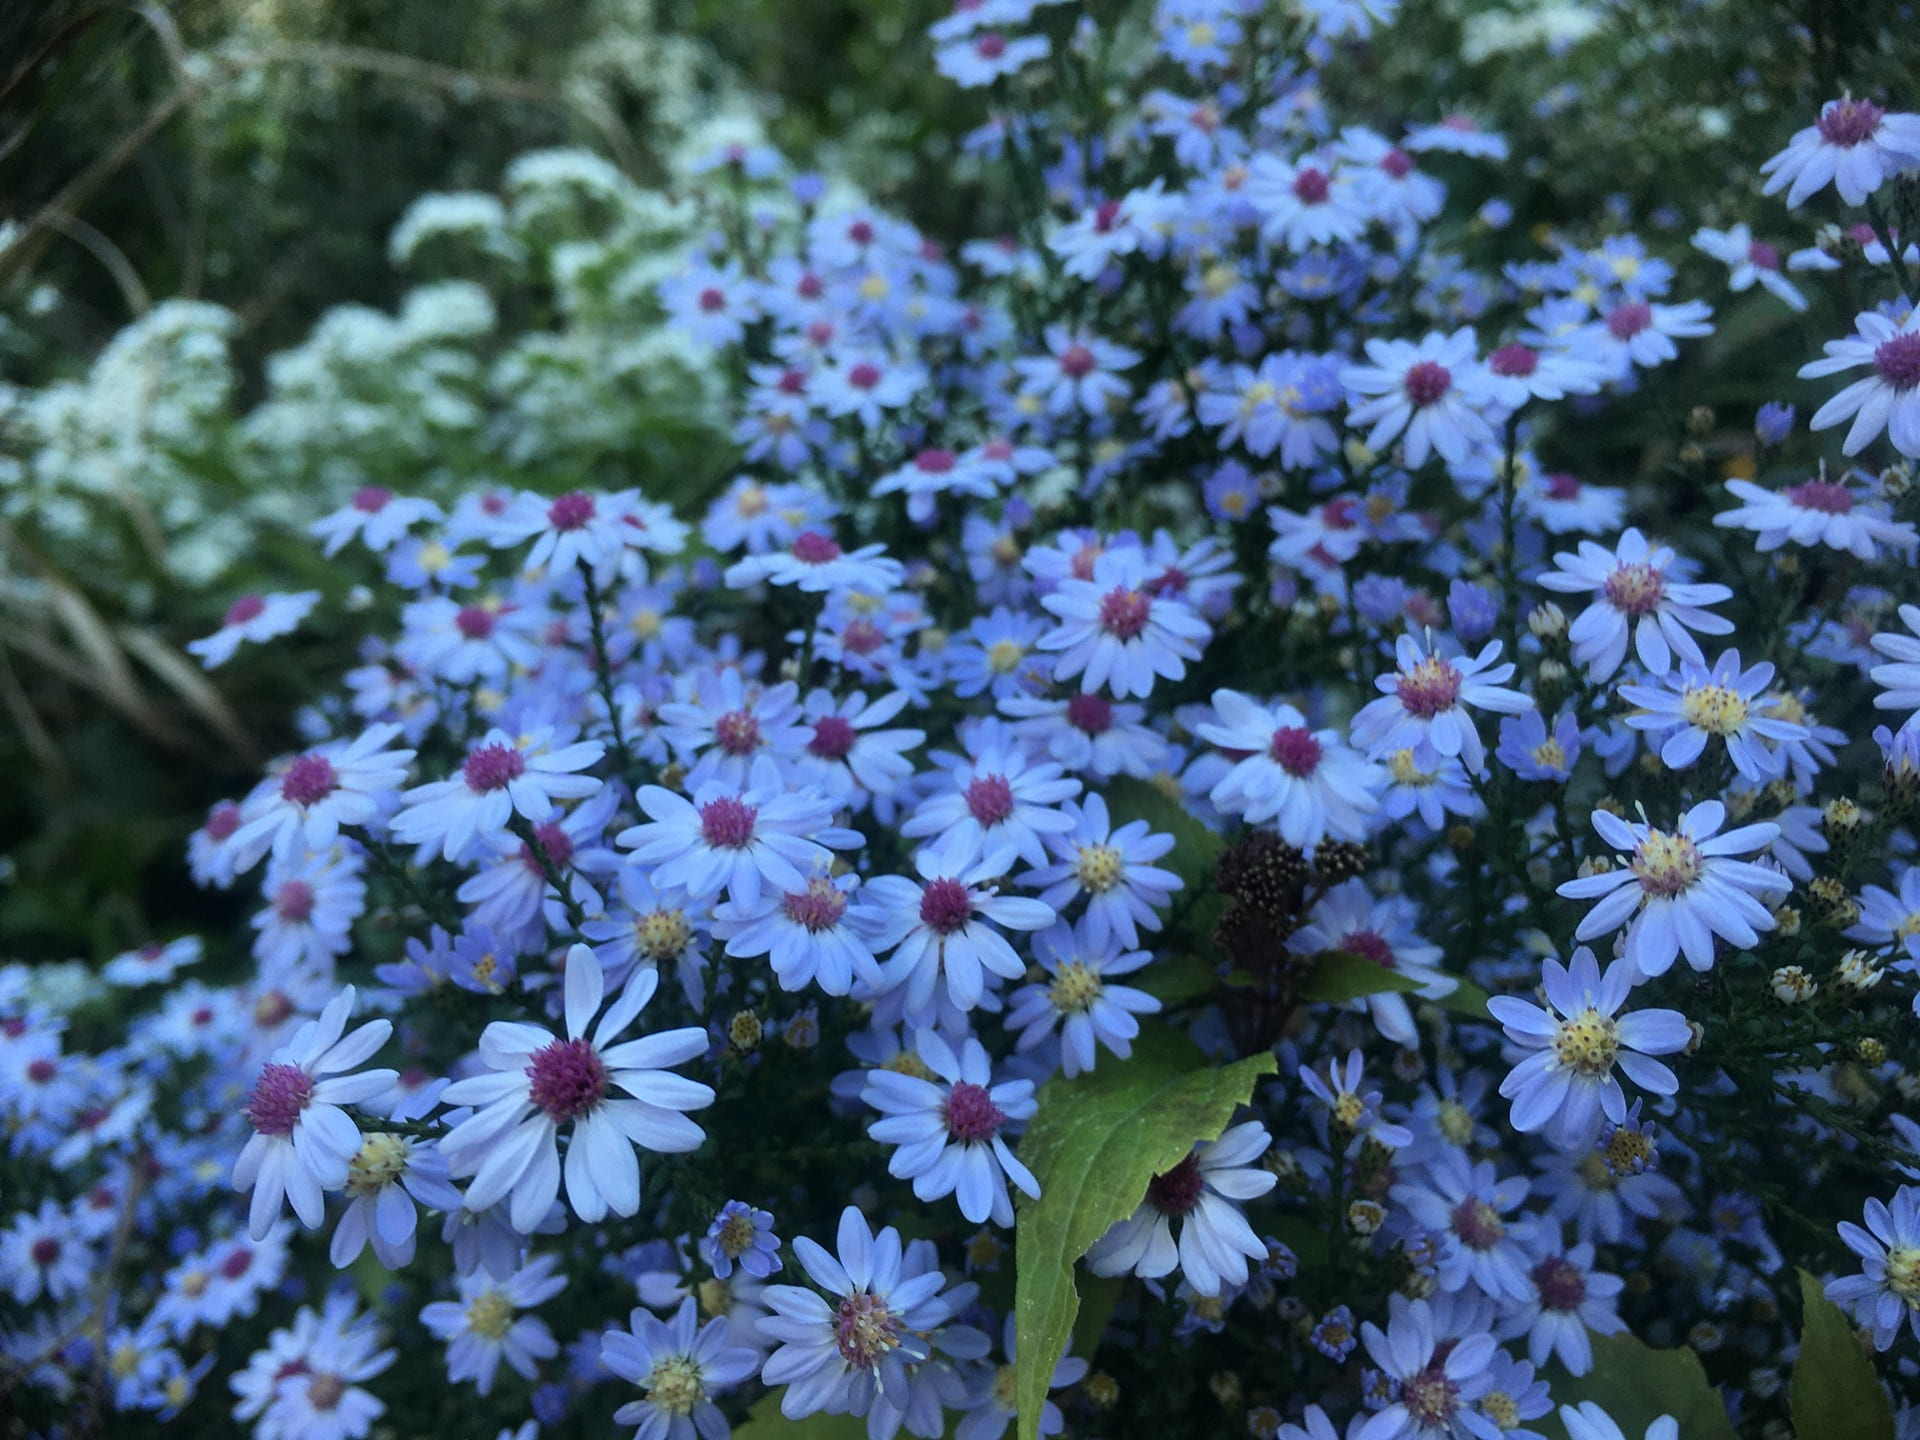 The small flowers of Symphyotrichum cordifolium putting on a show.